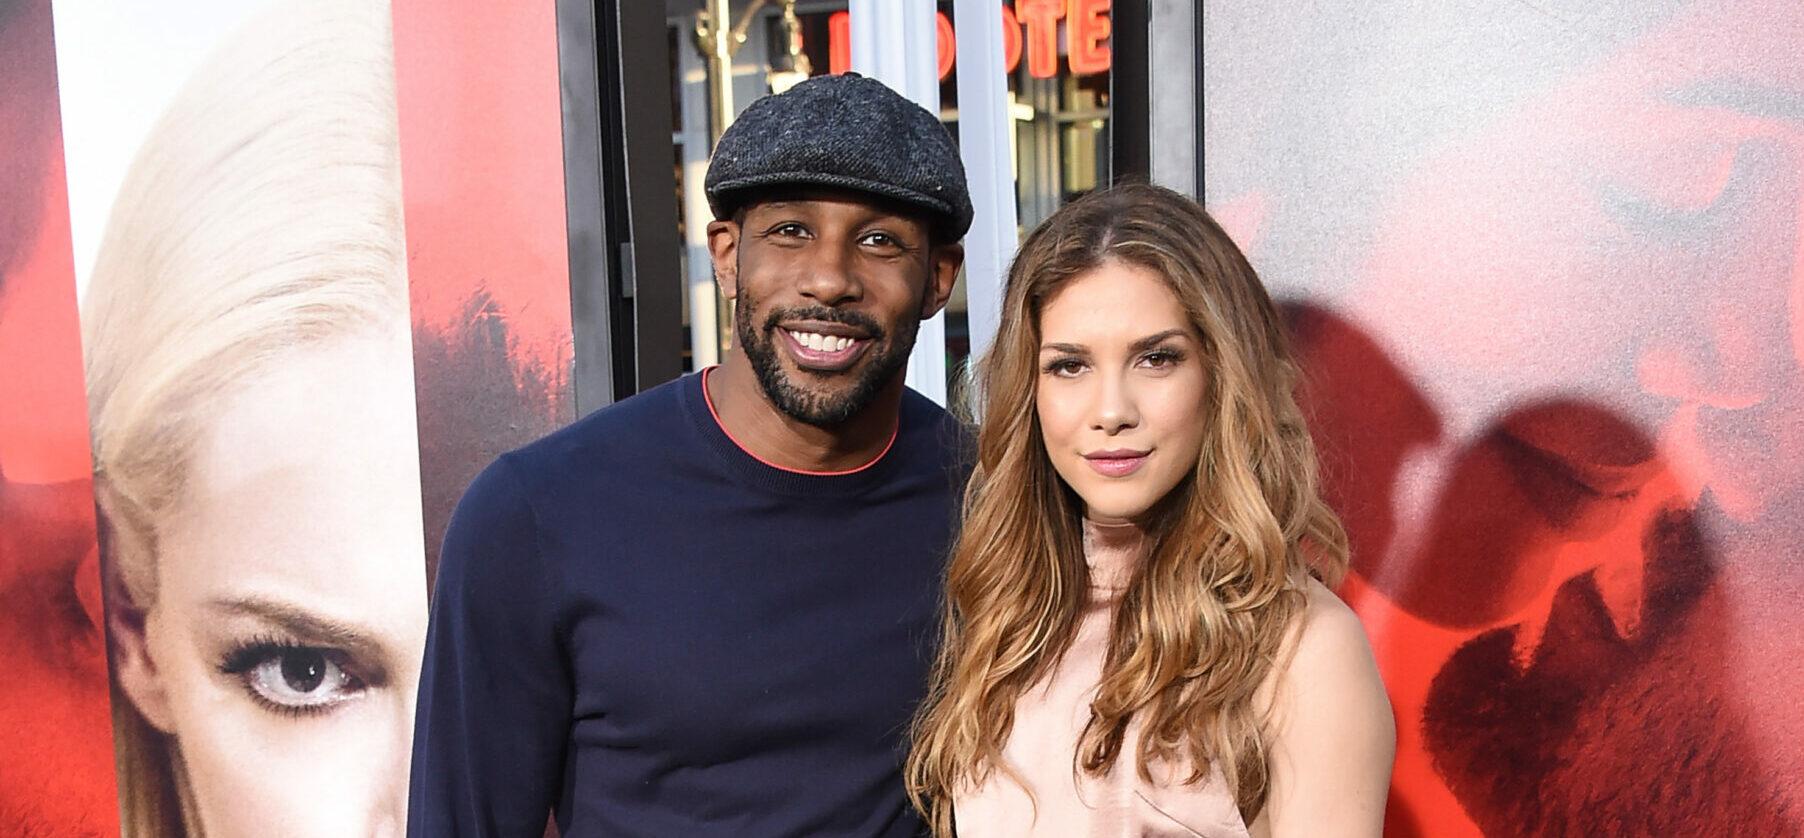 tWitch and Allison Holker arrive at the 'Unforgettable' film premiere